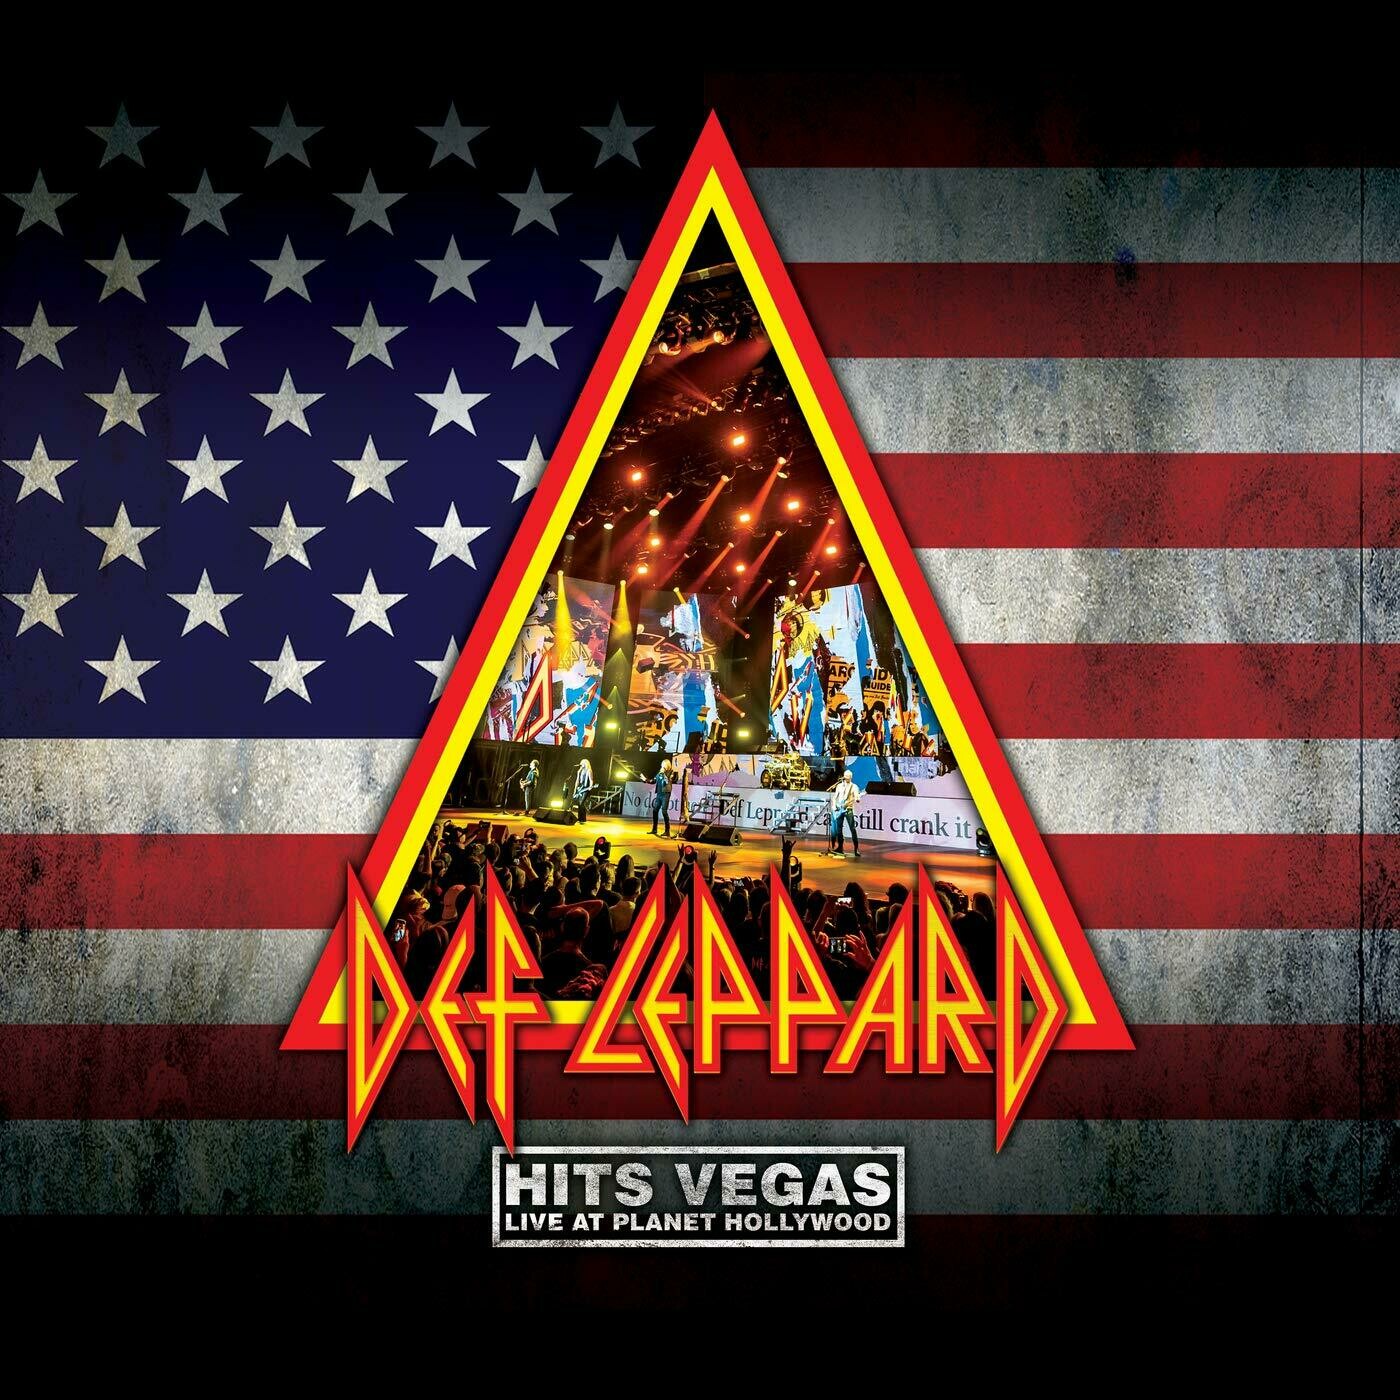 Def Leppard - Hits Vegas, Live At Planet Hollywood (2 CD + DVD)